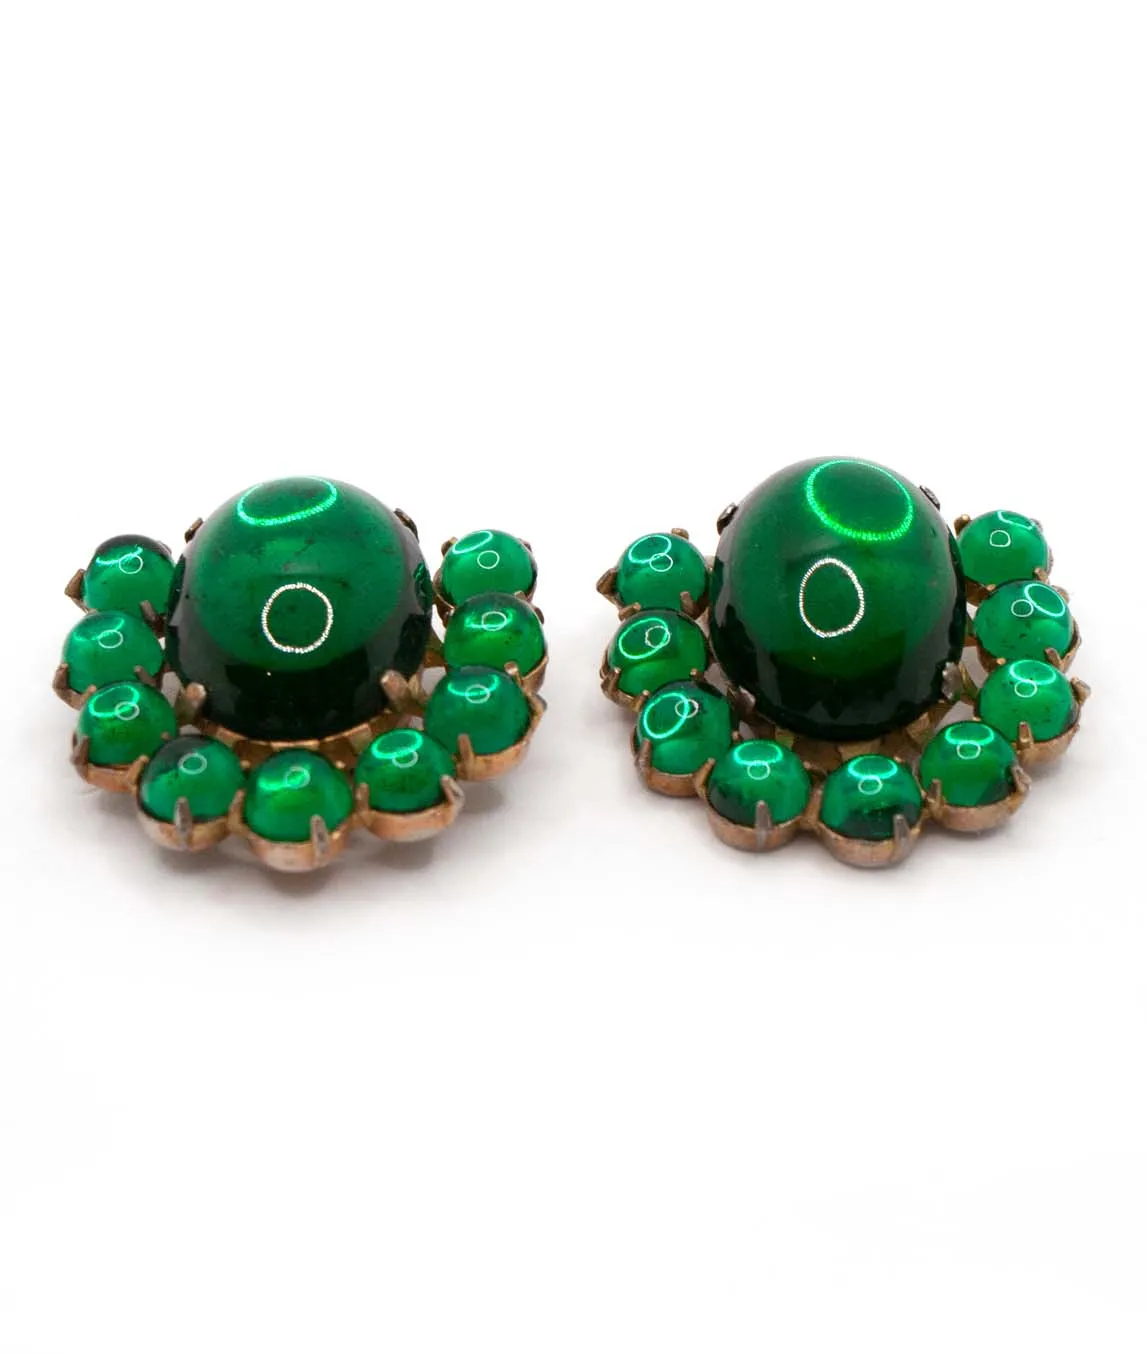 Pair of green glass cabochon dress clips with round glass stones as perimeter